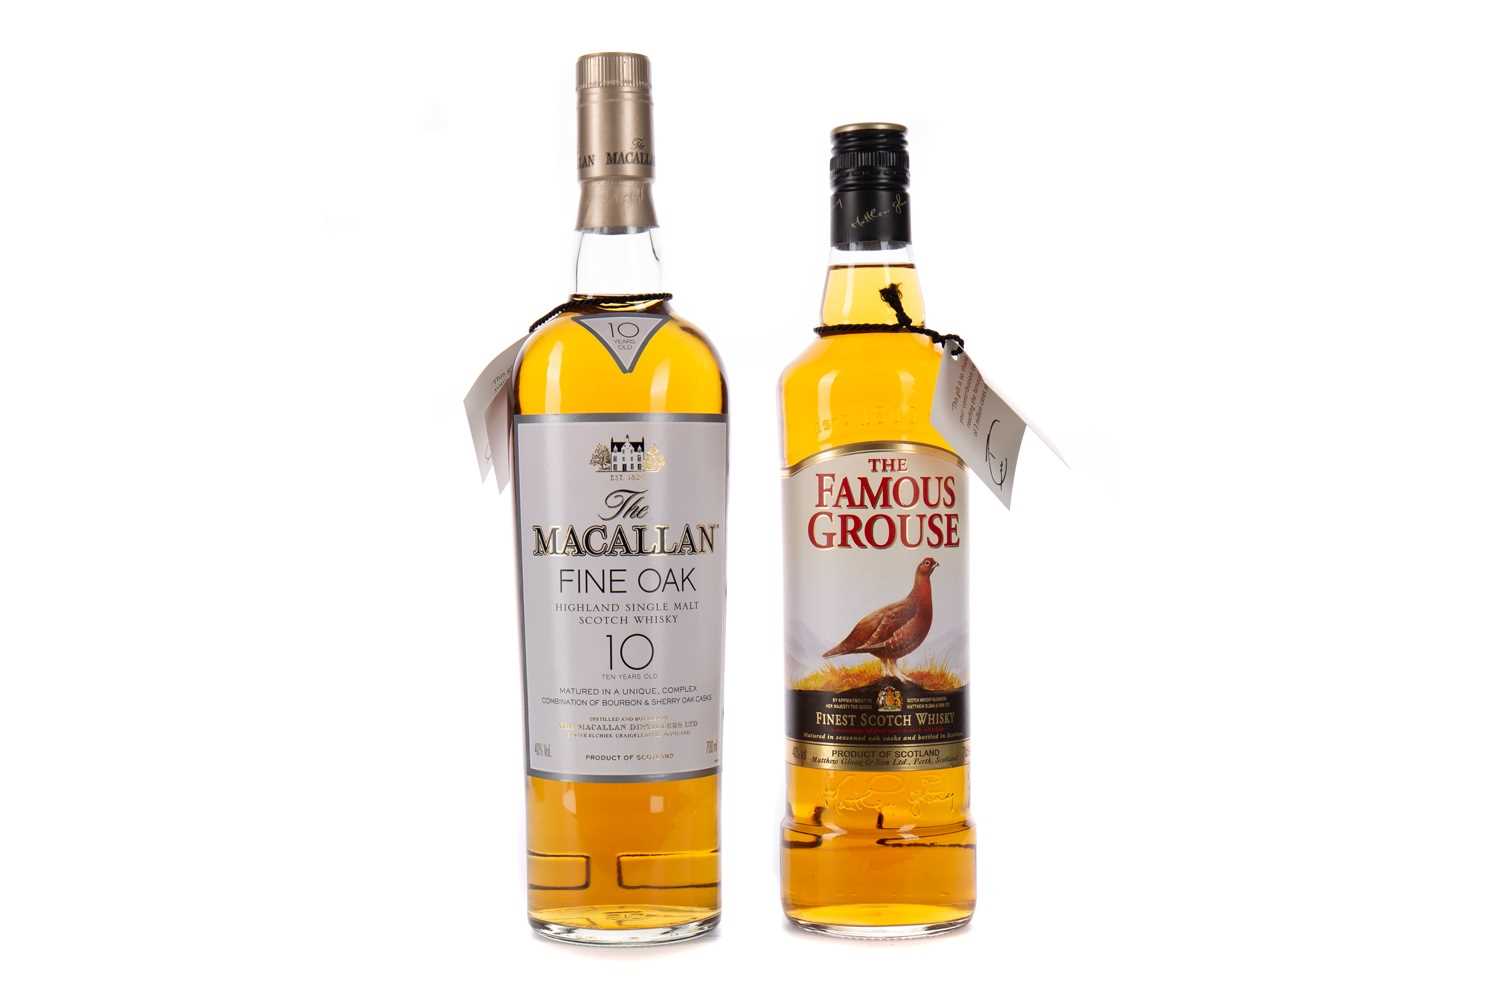 Lot 54 - MACALLAN FINE OAK 10 YEARS OLD AND FAMOUS GROUSE